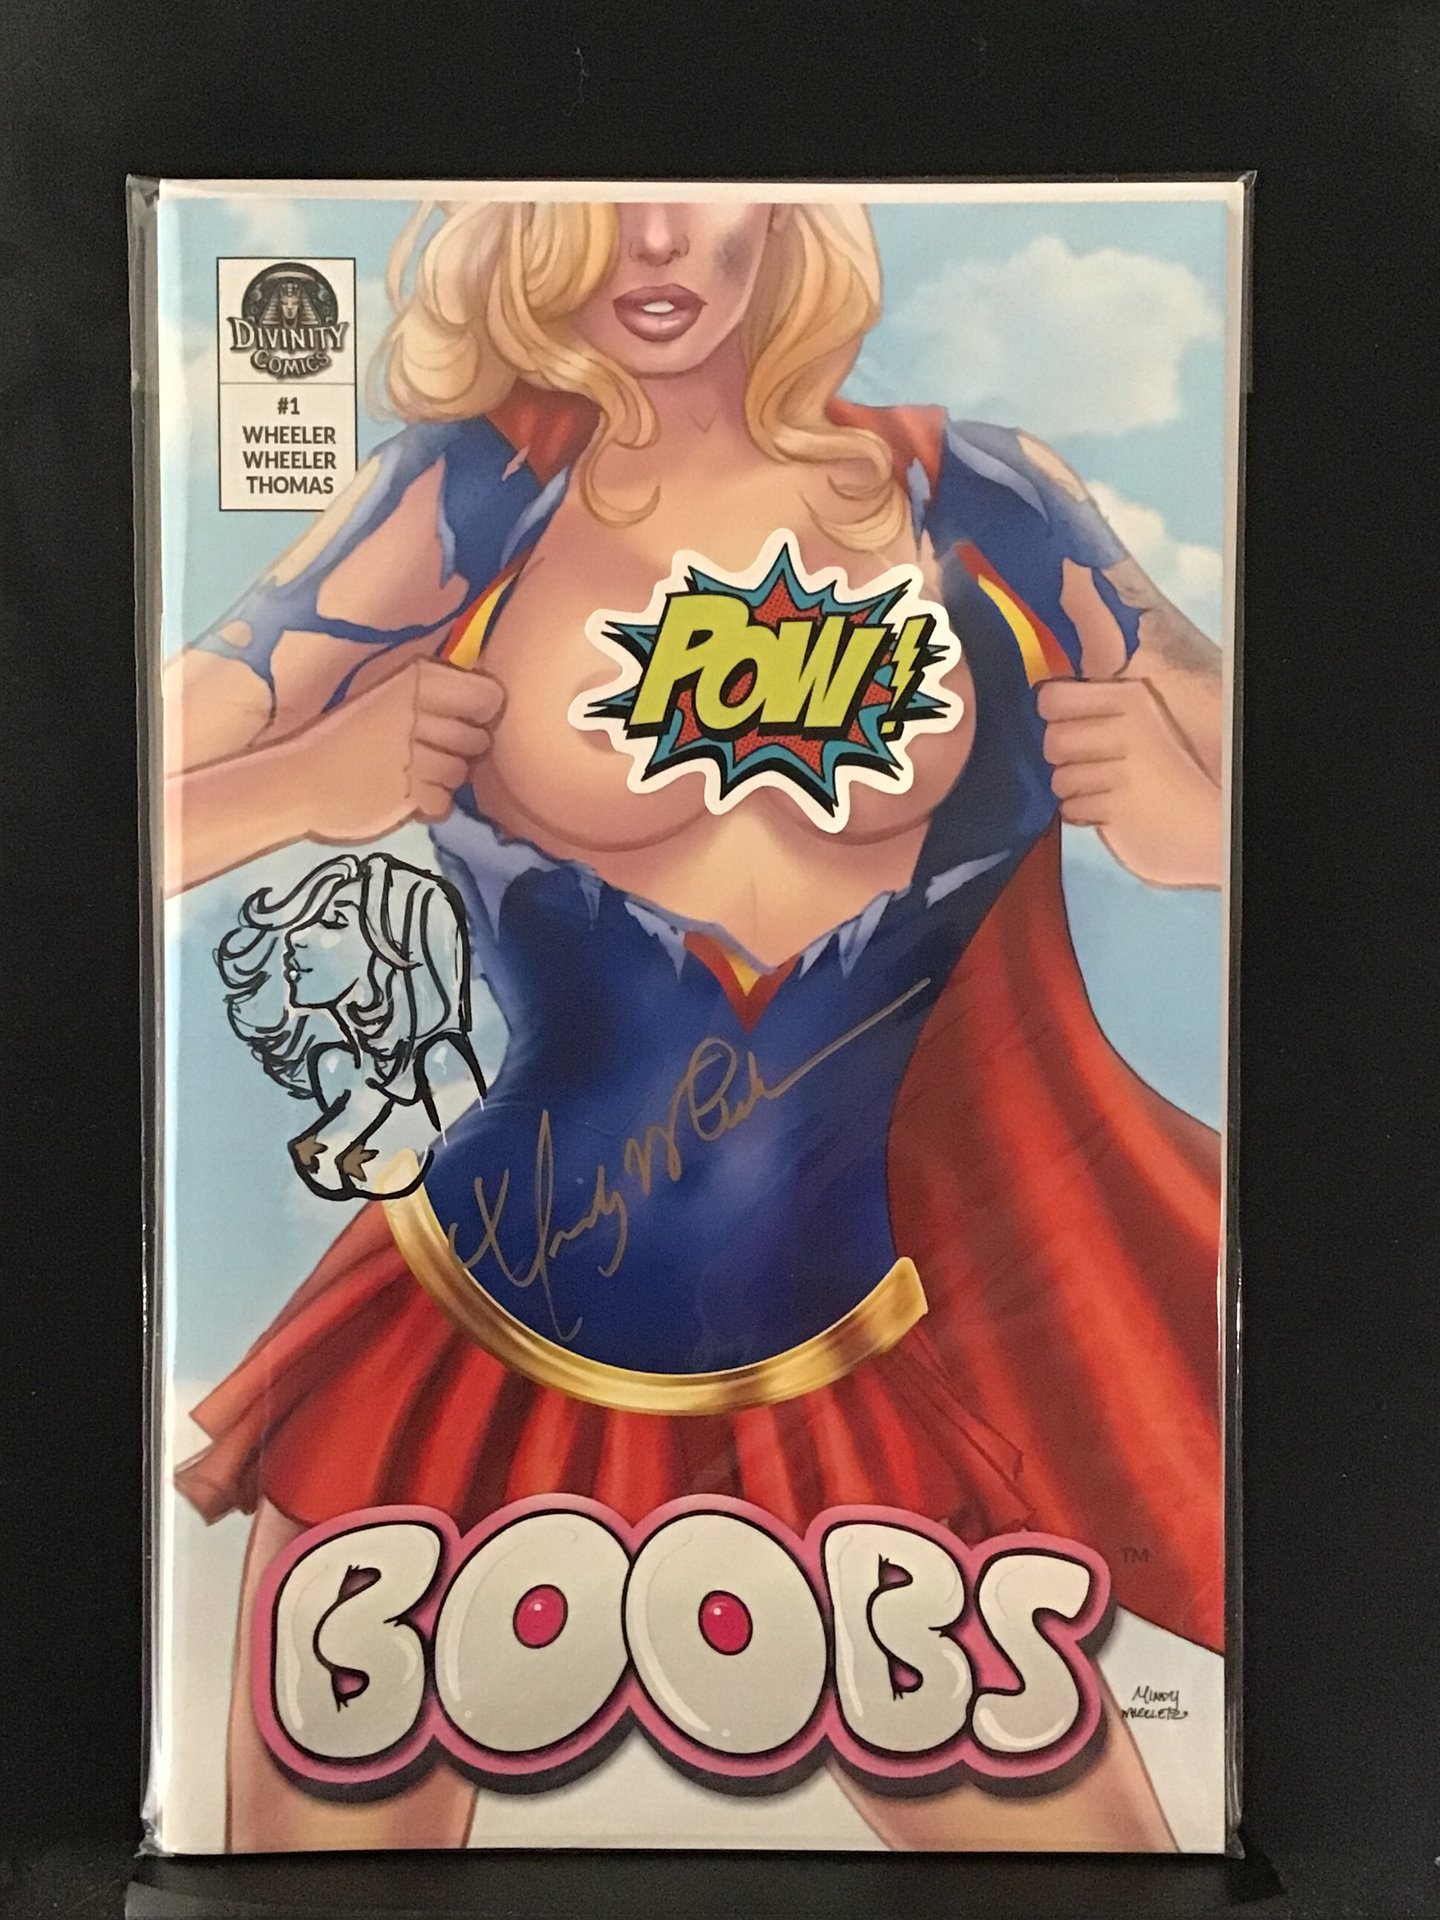 Boobs #1 Supergirl remarked and signed by Mindy Wheeler | Comic Books -  Modern Age, Superhero  HipComic